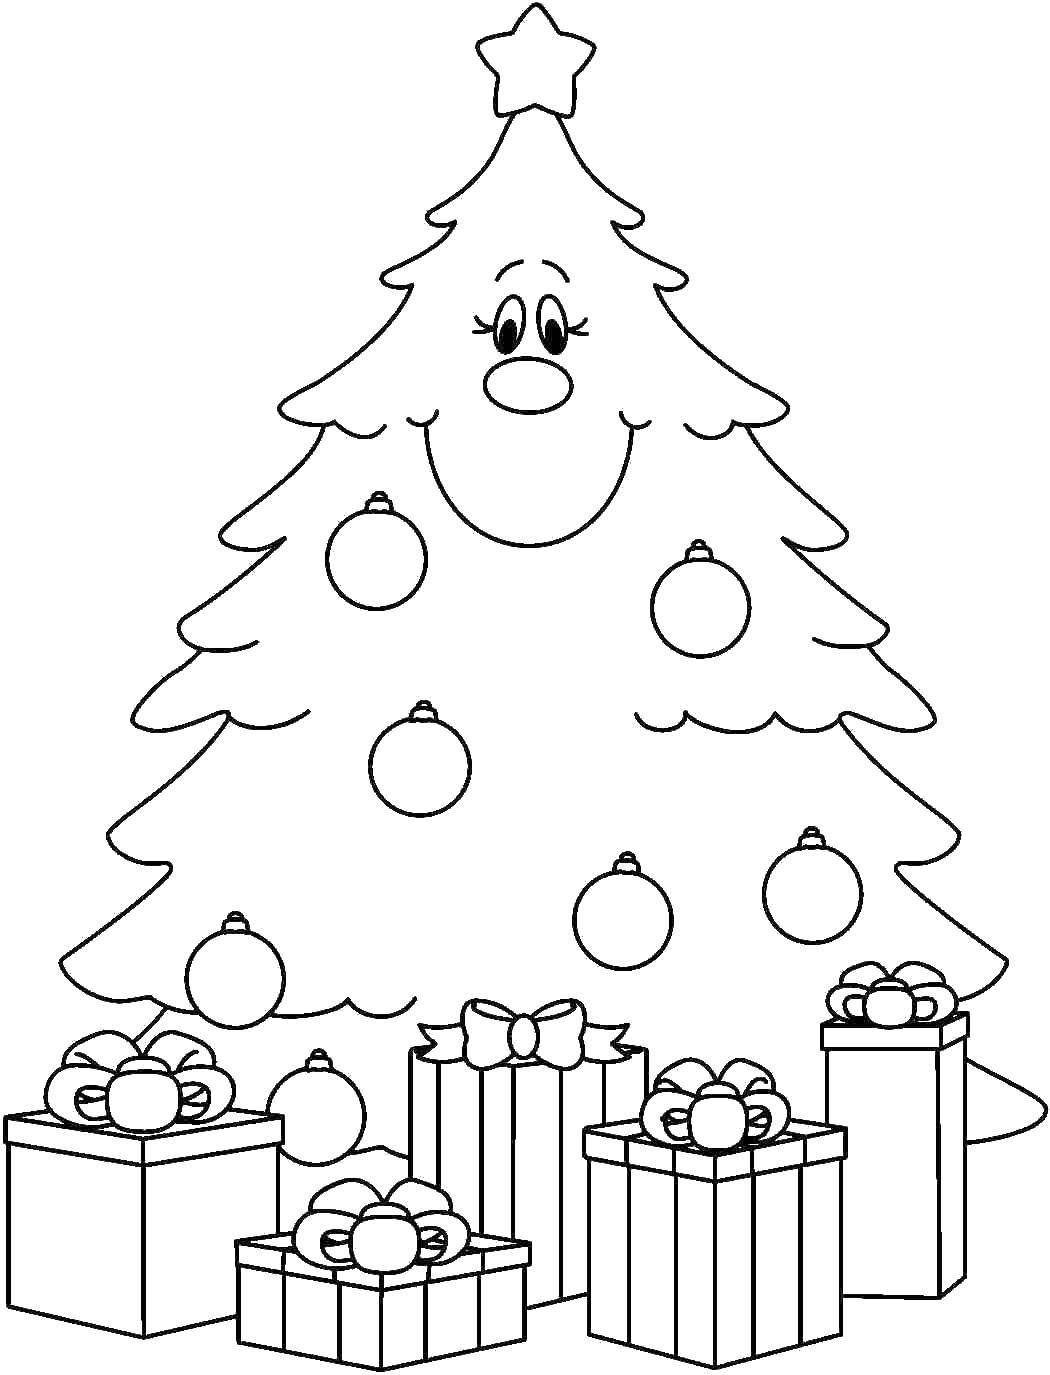 Coloring Gifts under the Christmas tree. Category Christmas. Tags:  Christmas, gifts.